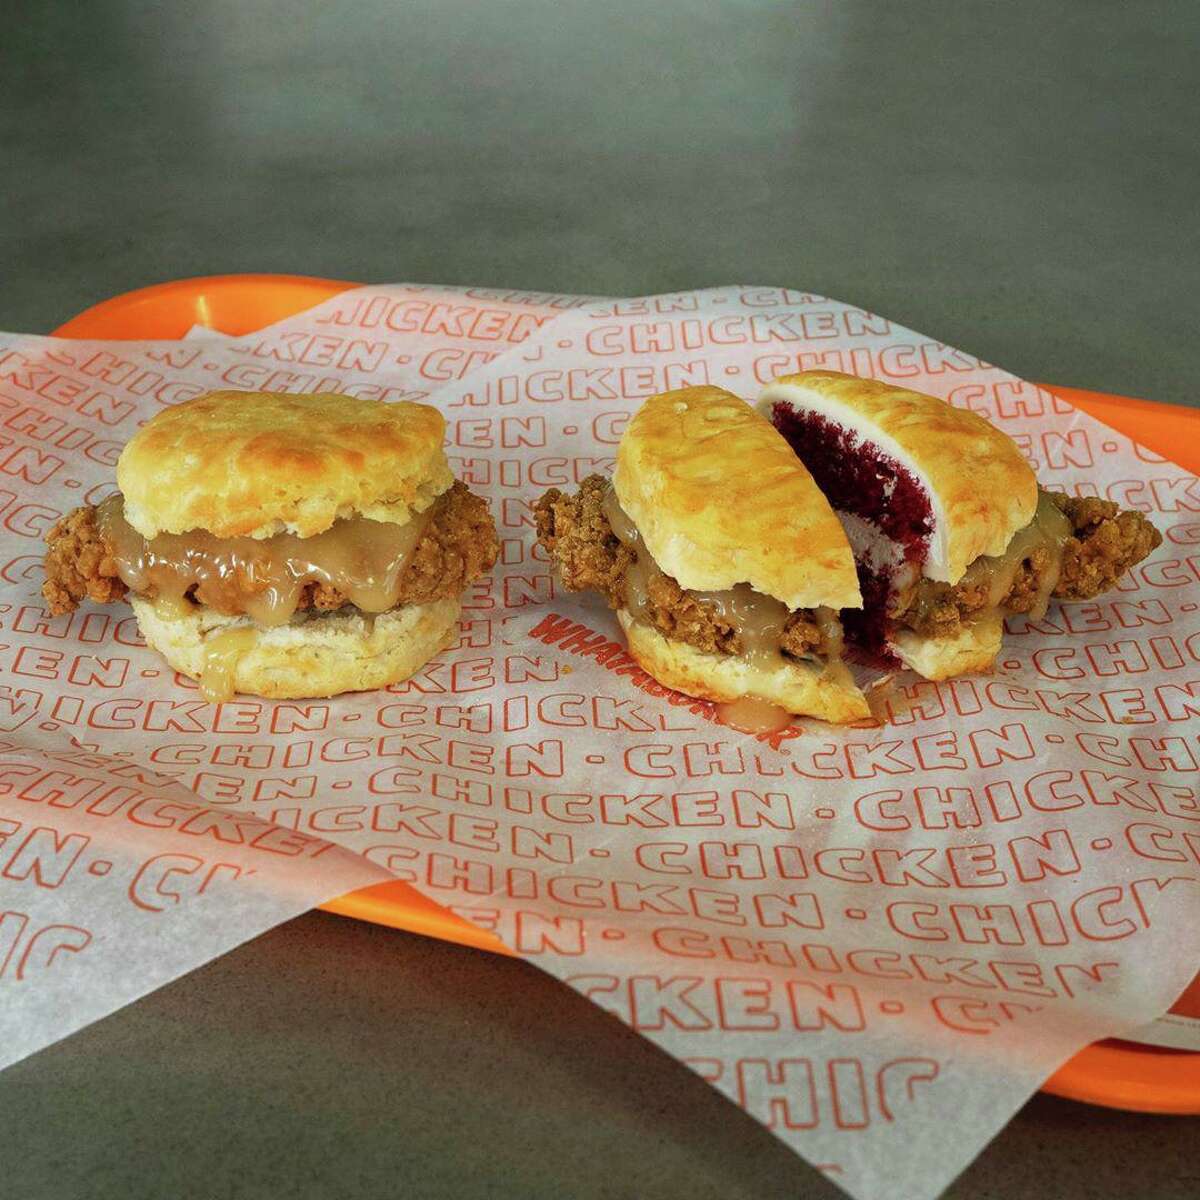 Is it Whataburger honey butter chicken biscuits? Nope, it's a cake. Natalie Sideserf of Sideserf Cake Studio has been making realistic cakes since 2012.